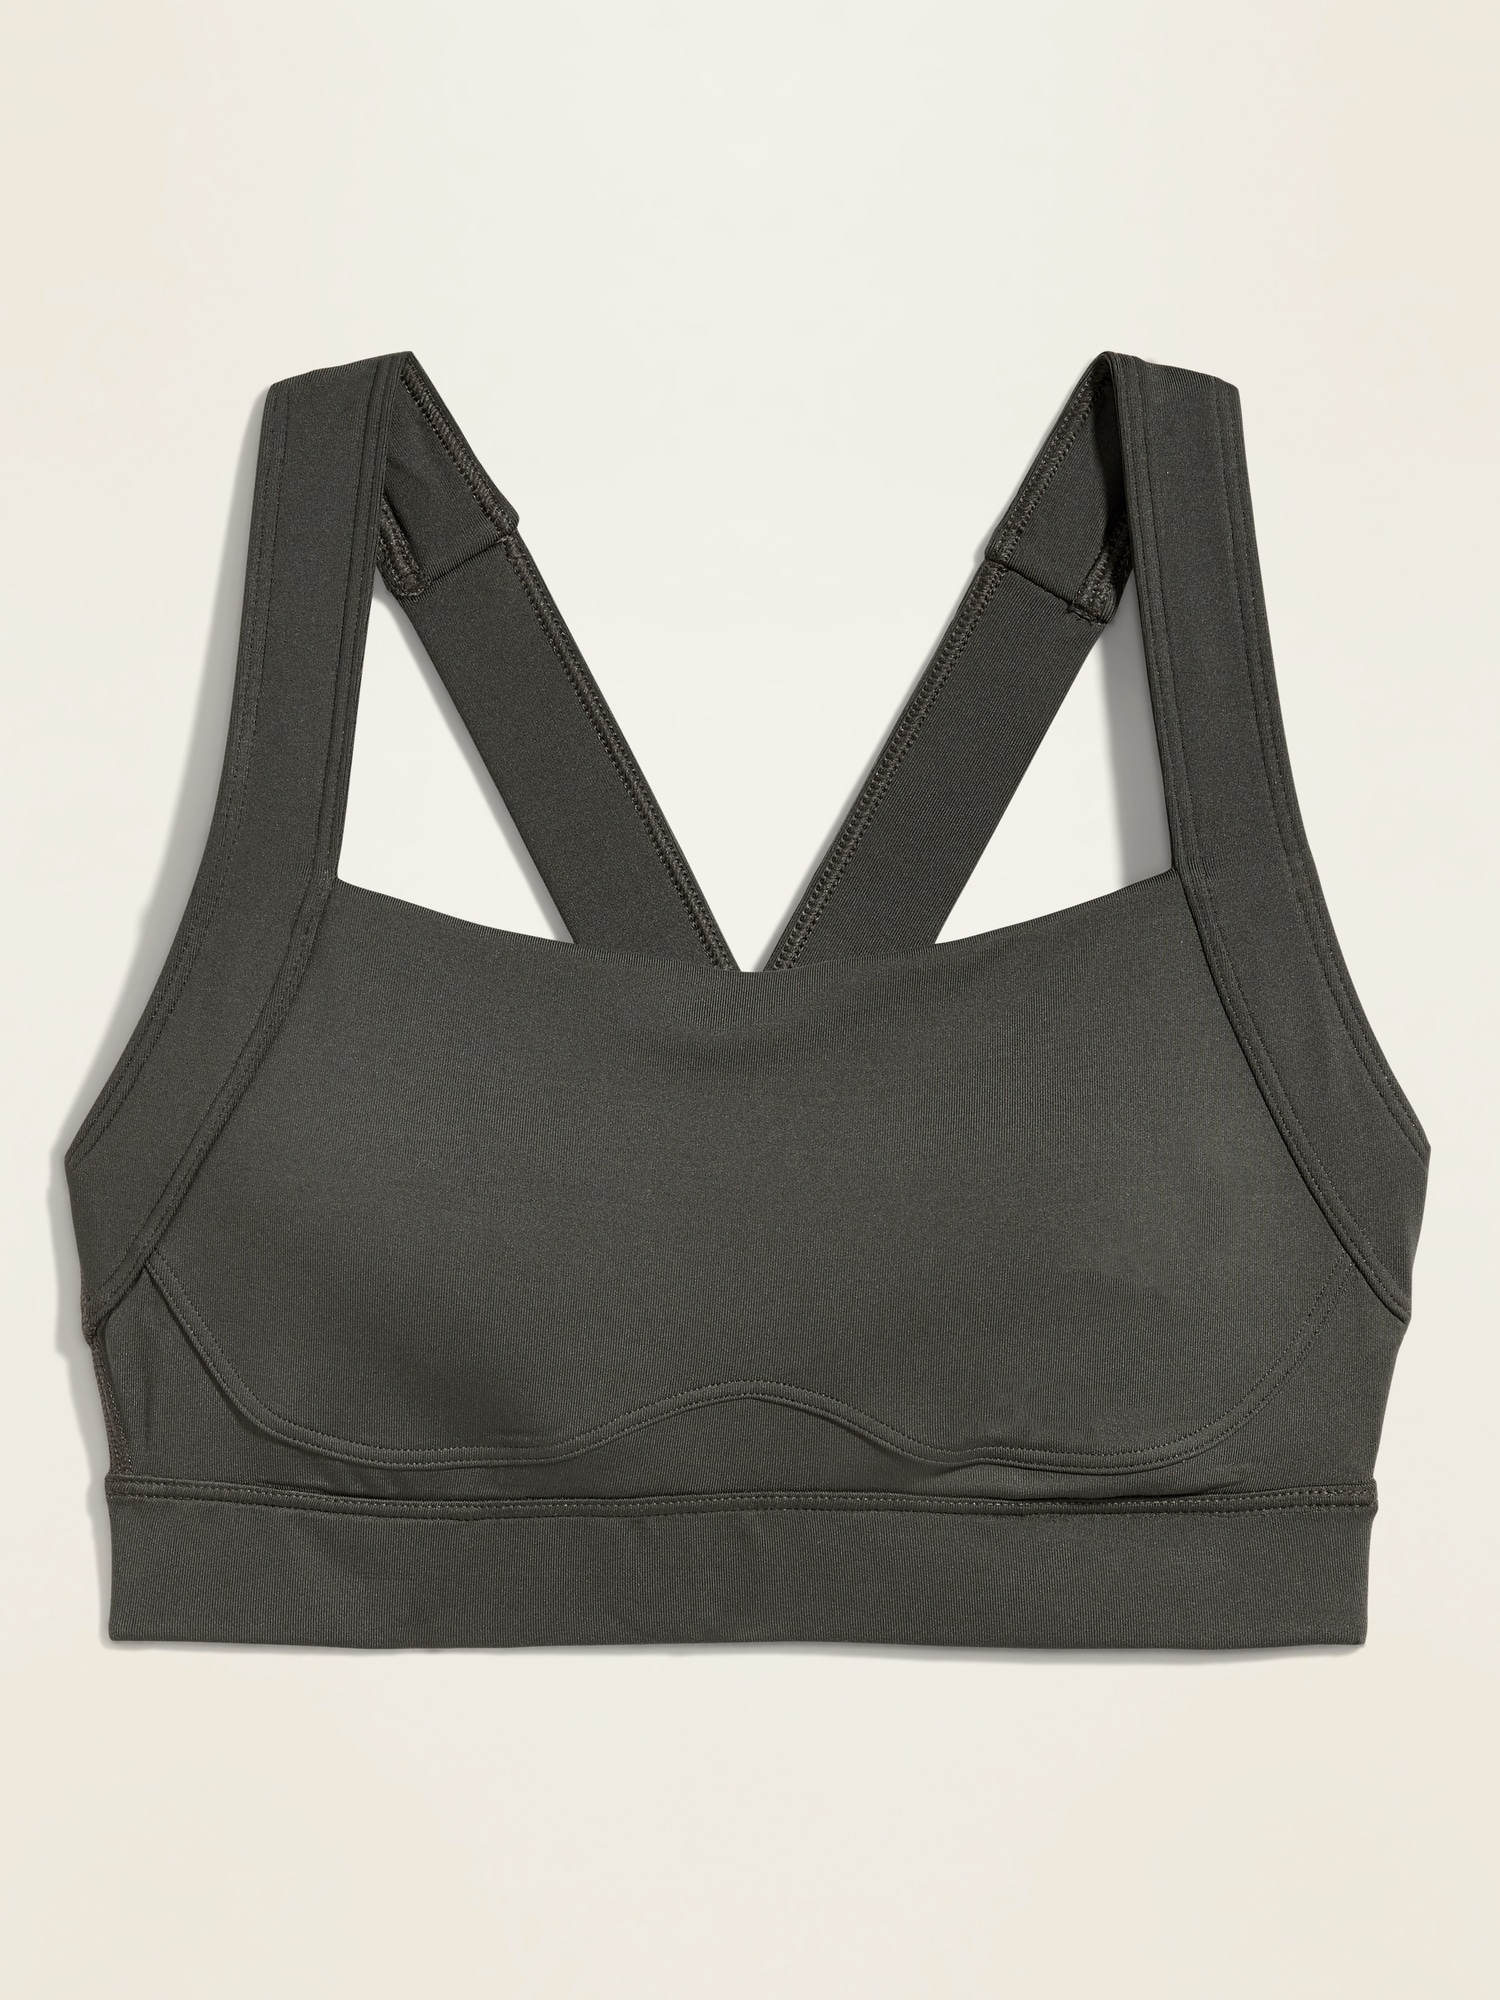 High Support Cross-Back Sports Bra for Women XS-XXL | Old Navy